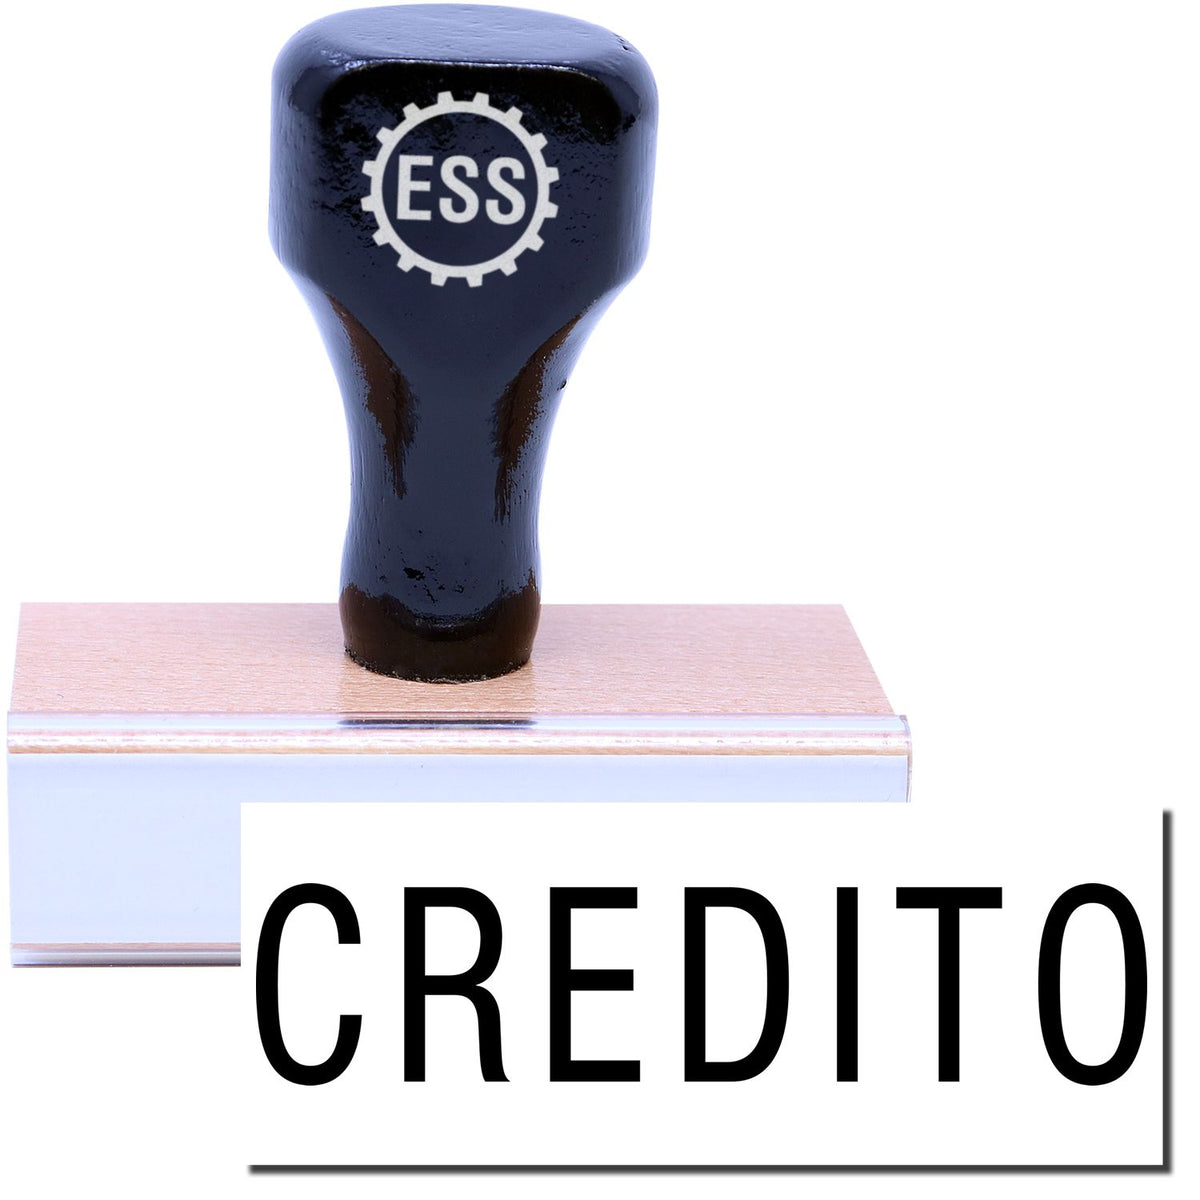 A stock office rubber stamp with a stamped image showing how the text &quot;CREDITO&quot; is displayed after stamping.